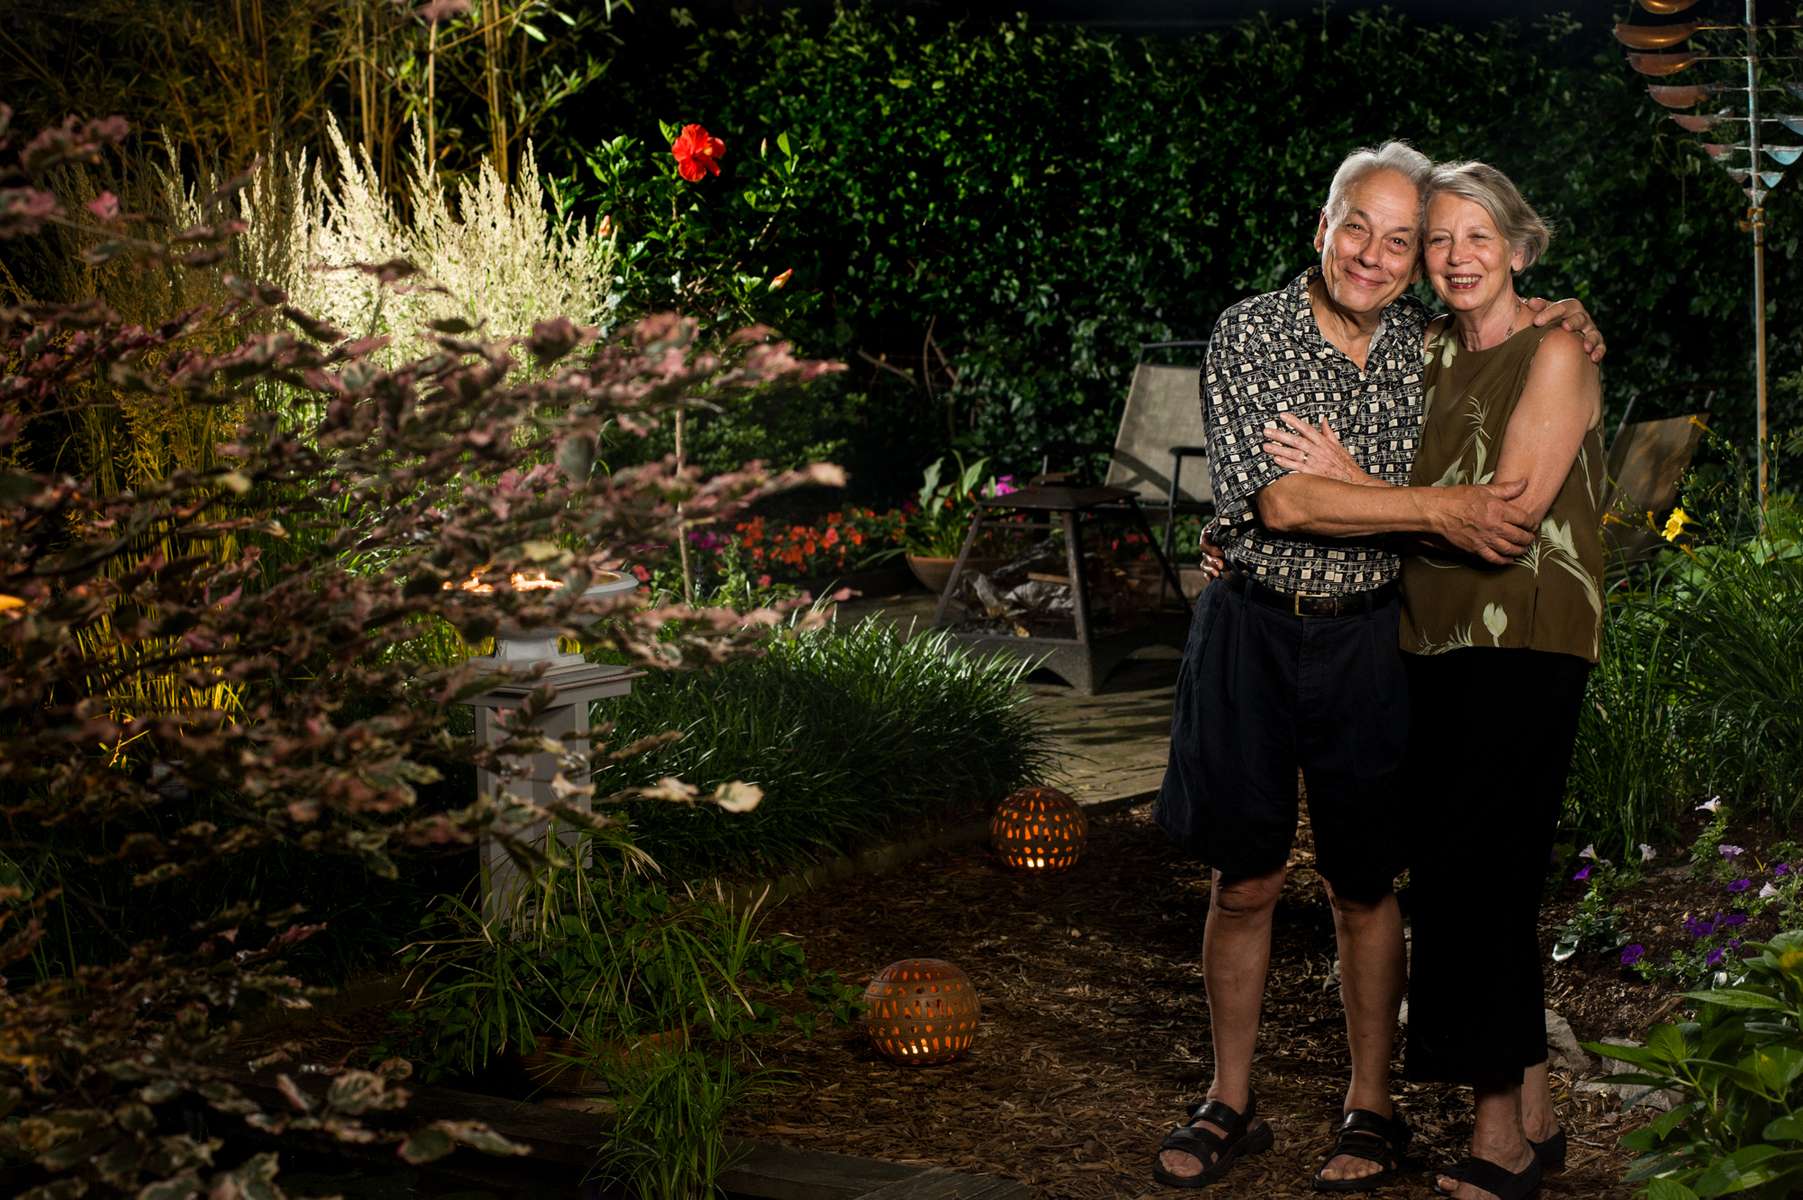 A loving couple share a hug and their love for one another in their beautiful garden on a pleasant summer evening.